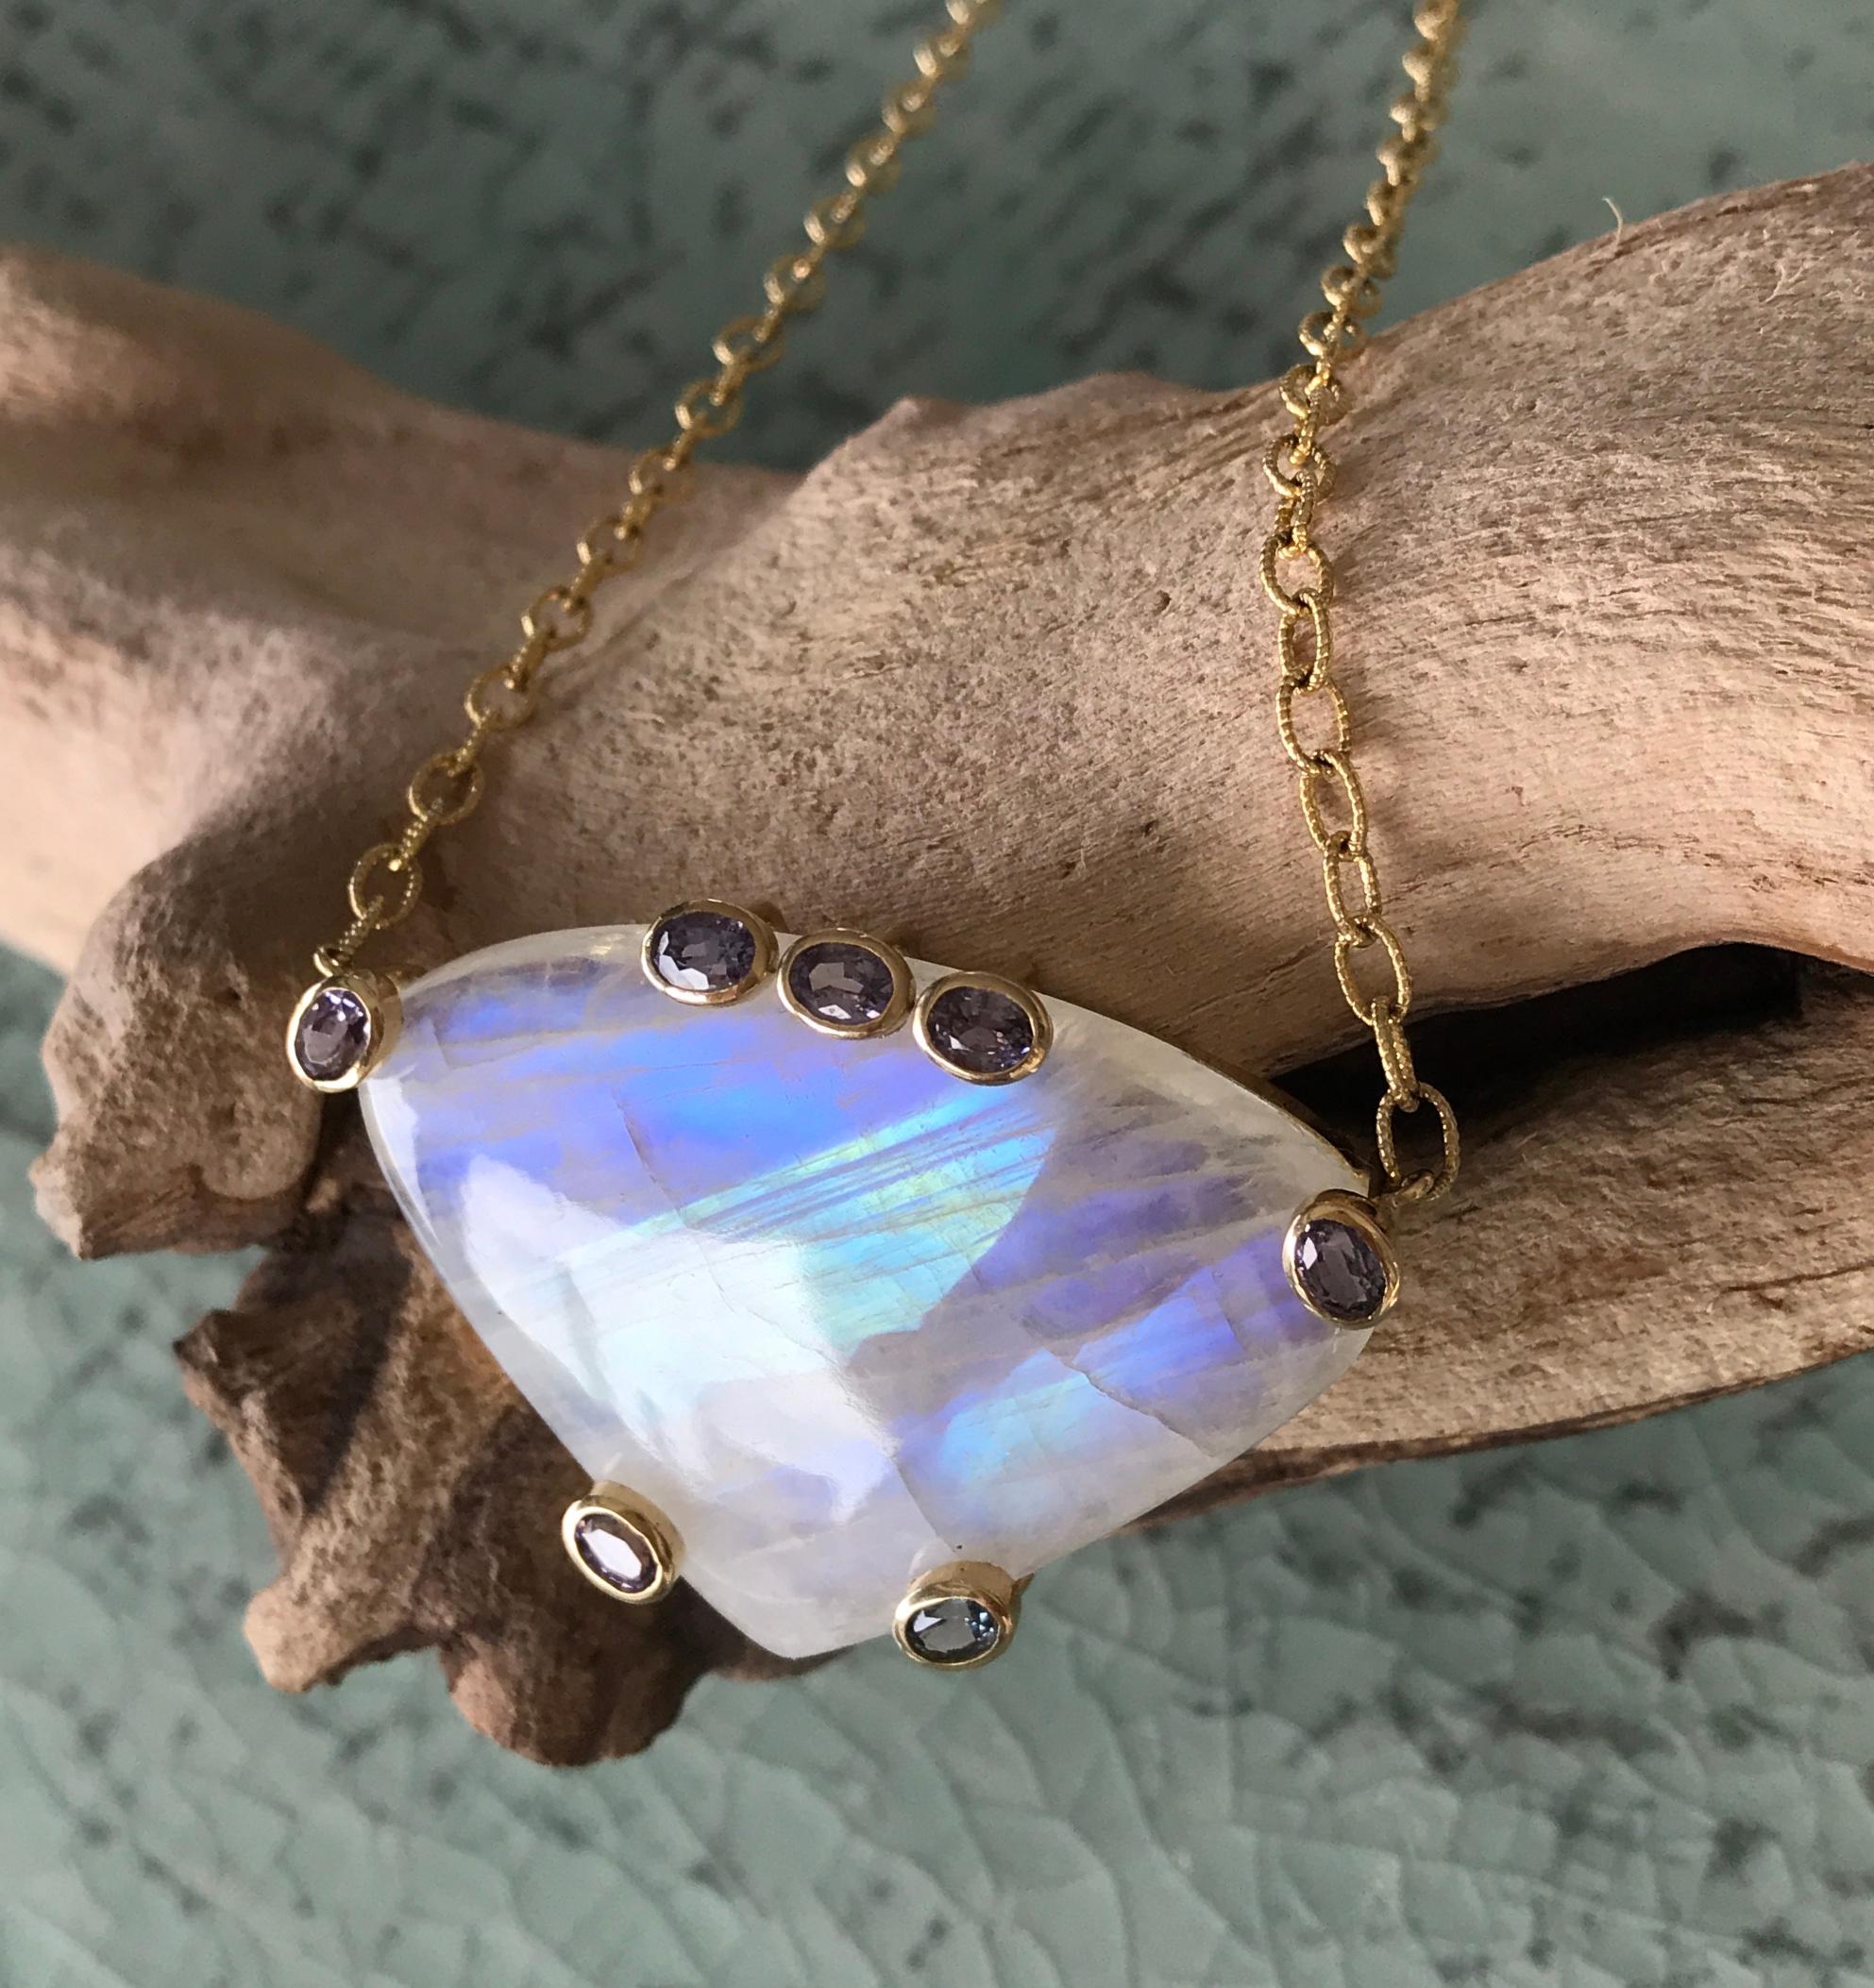 This Joon Han one-of-a-kind rainbow moonstone necklace features a large fancy cut cabochon moonstone as its centerpiece, with oval faceted purple spinel accents. The gorgeous and numerous blue flashes of the rainbow moonstone come to life in the